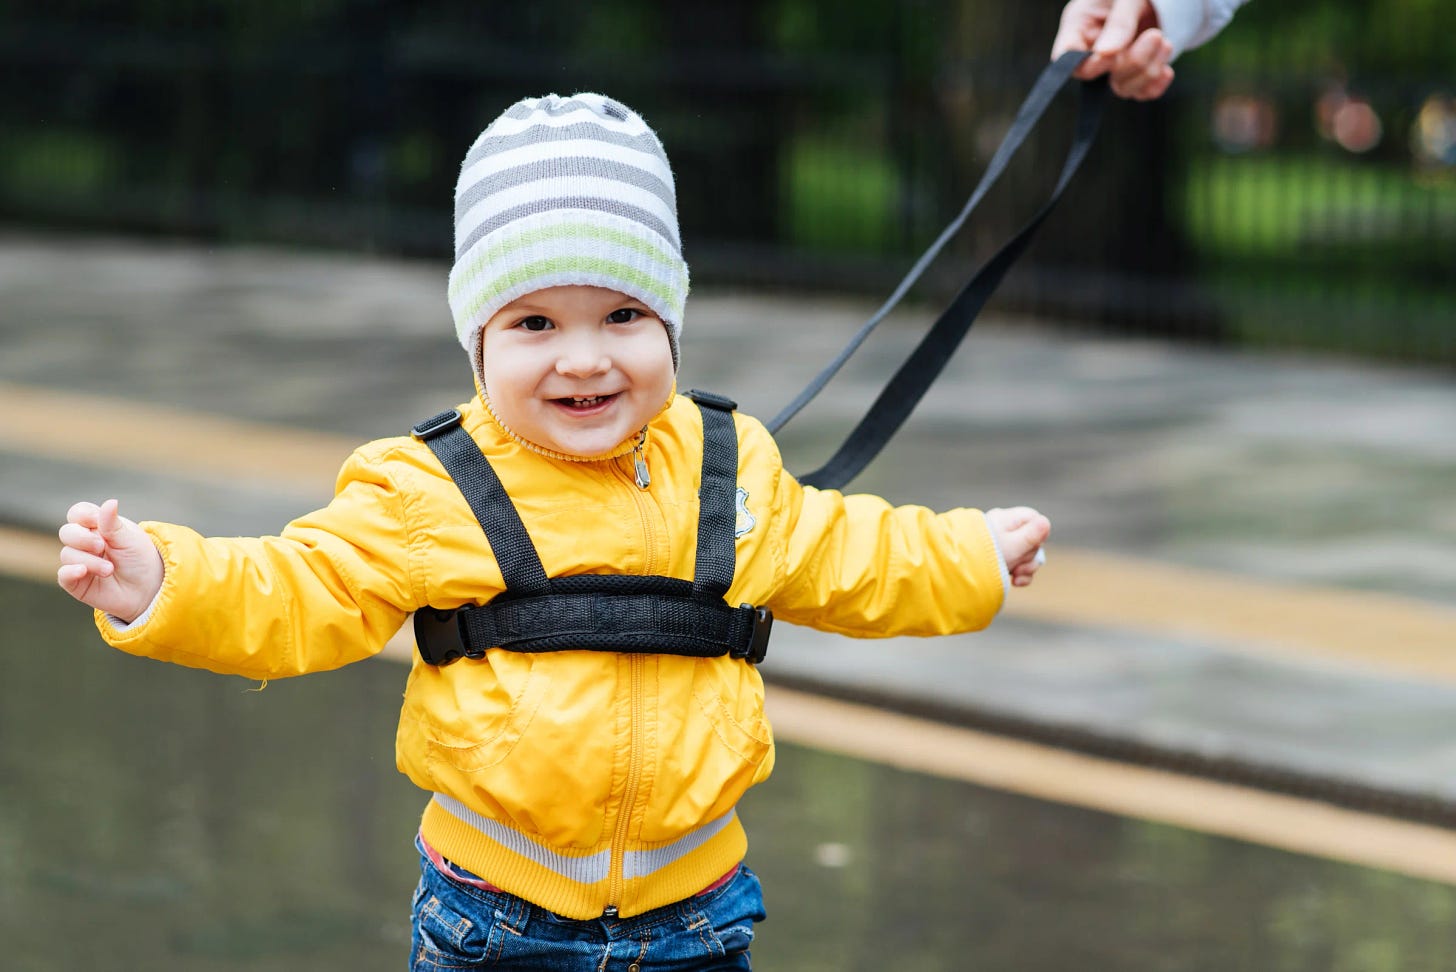 Picture of a young white child wearing a yellow jacket, multicolored hat and a safety harness